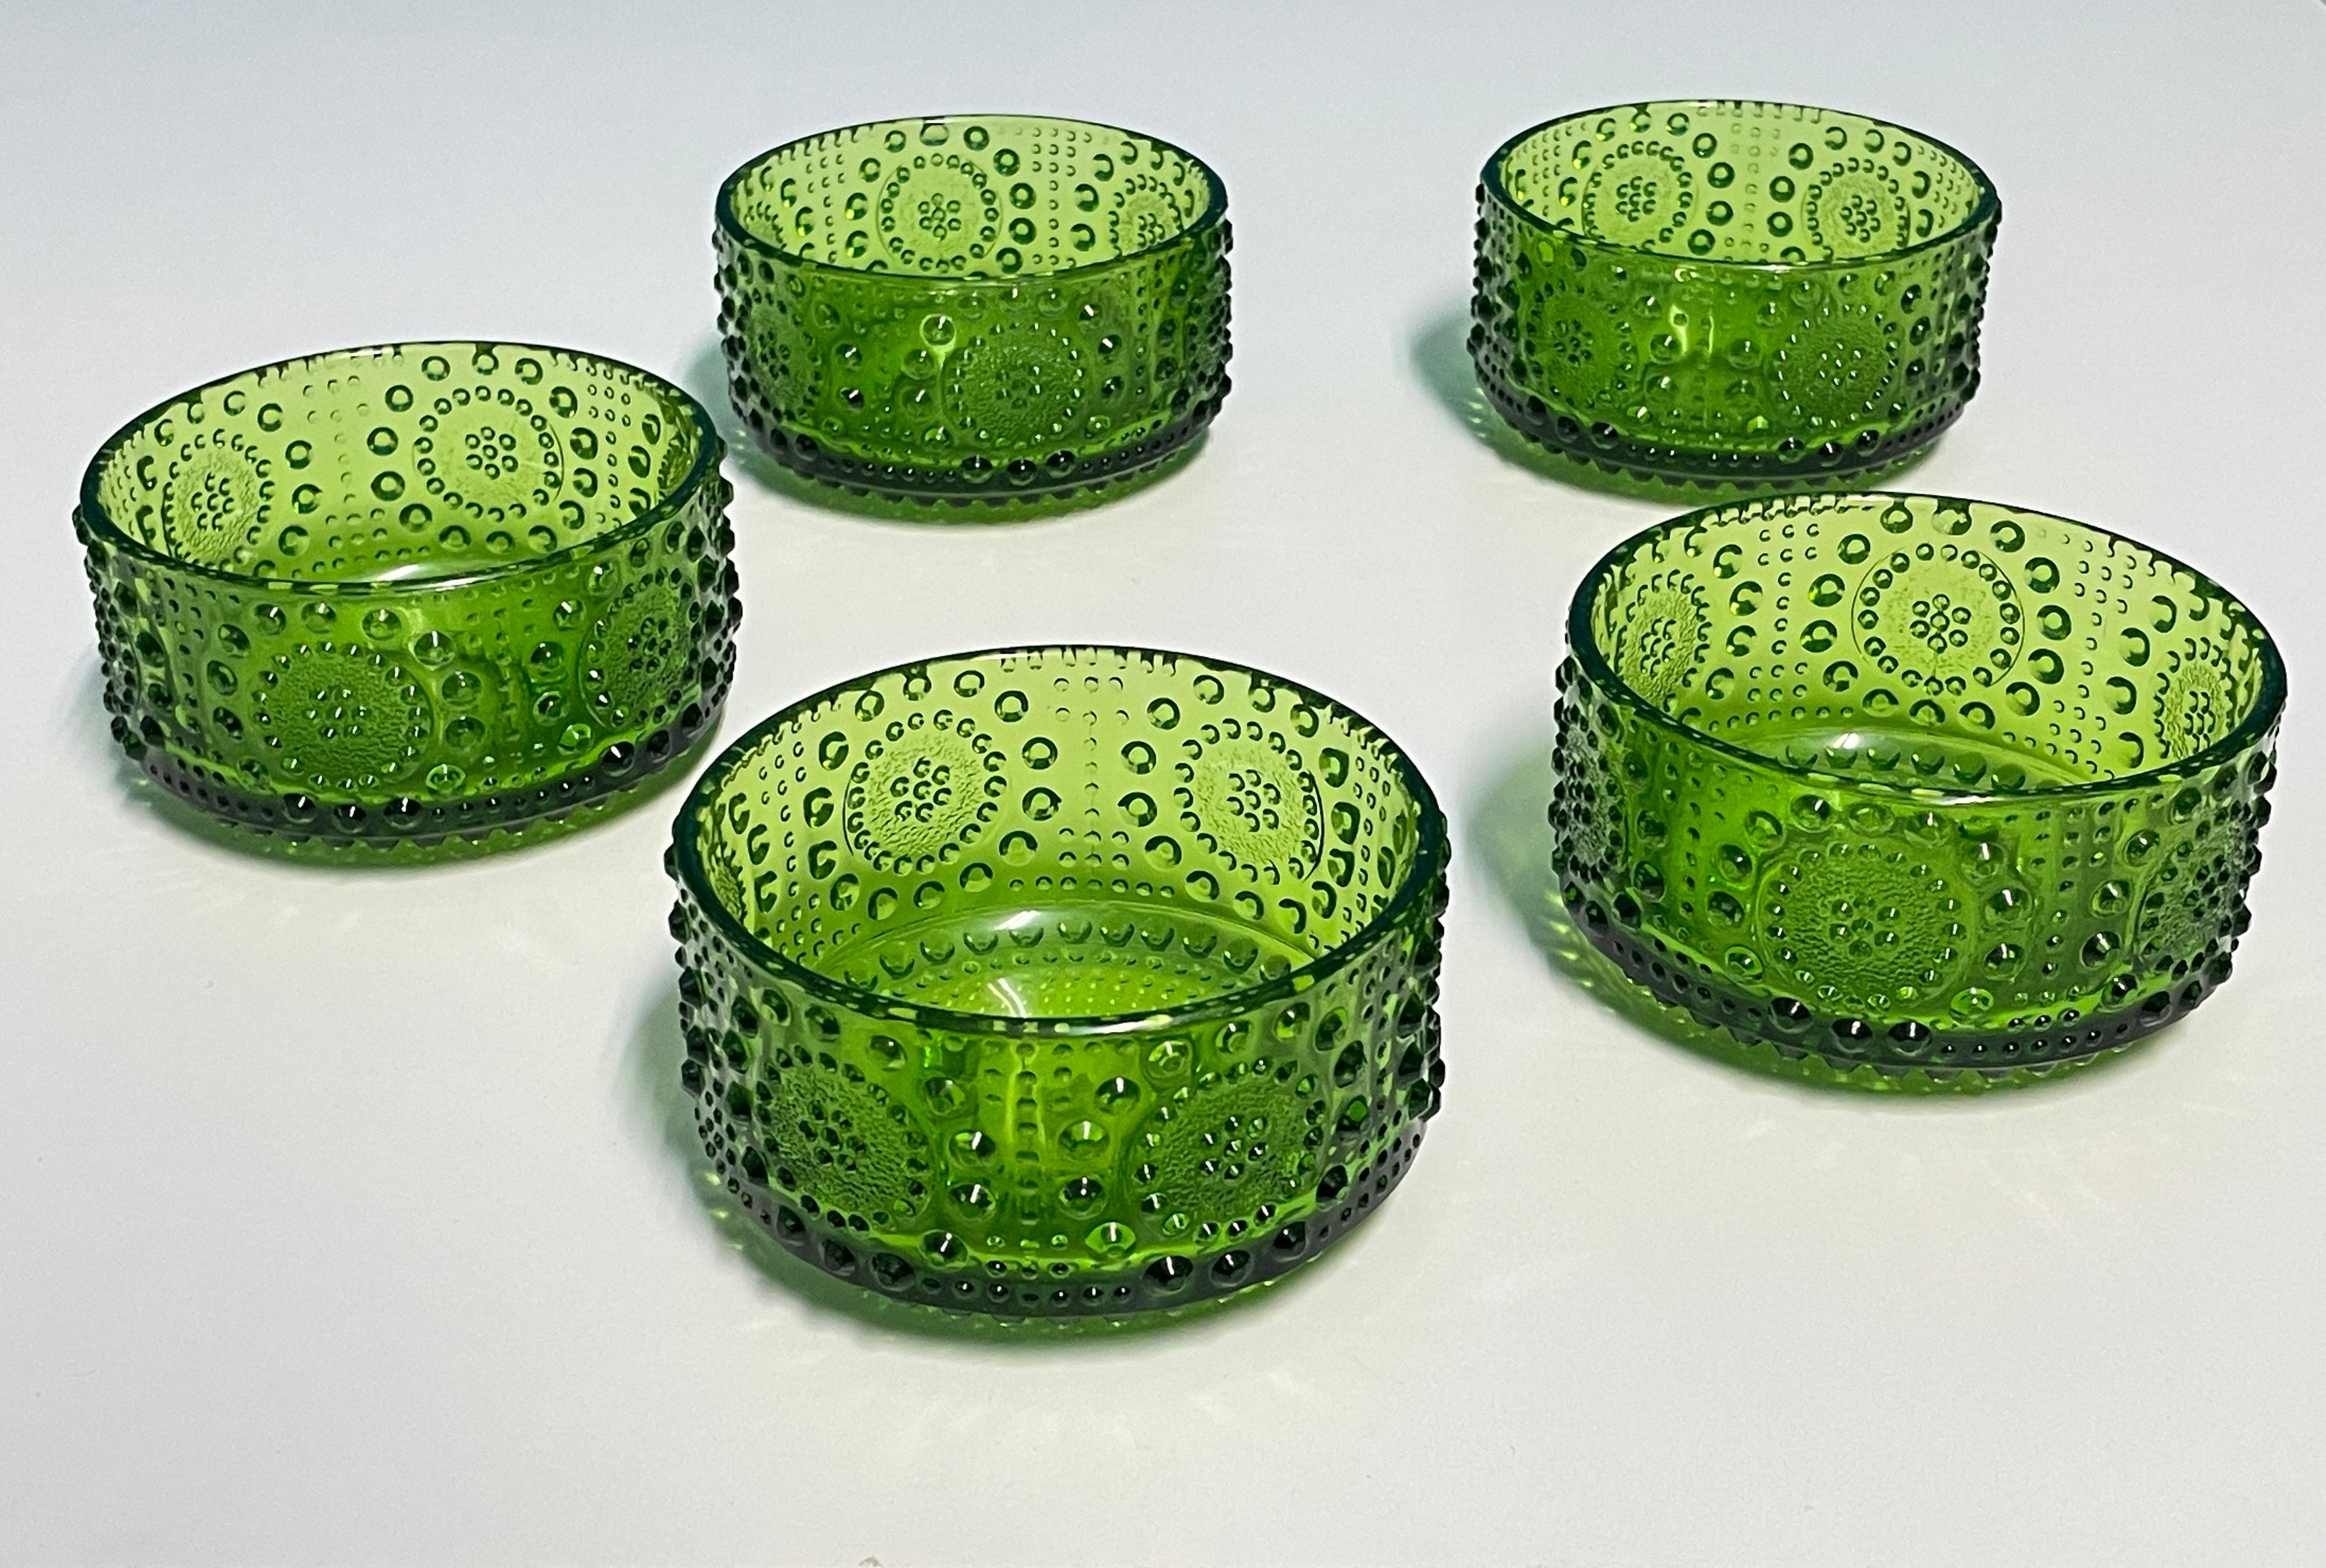 1960's Dessert Bowls Designed by Nanny Still - Made in Finland. Set of 5pcs For Sale 2